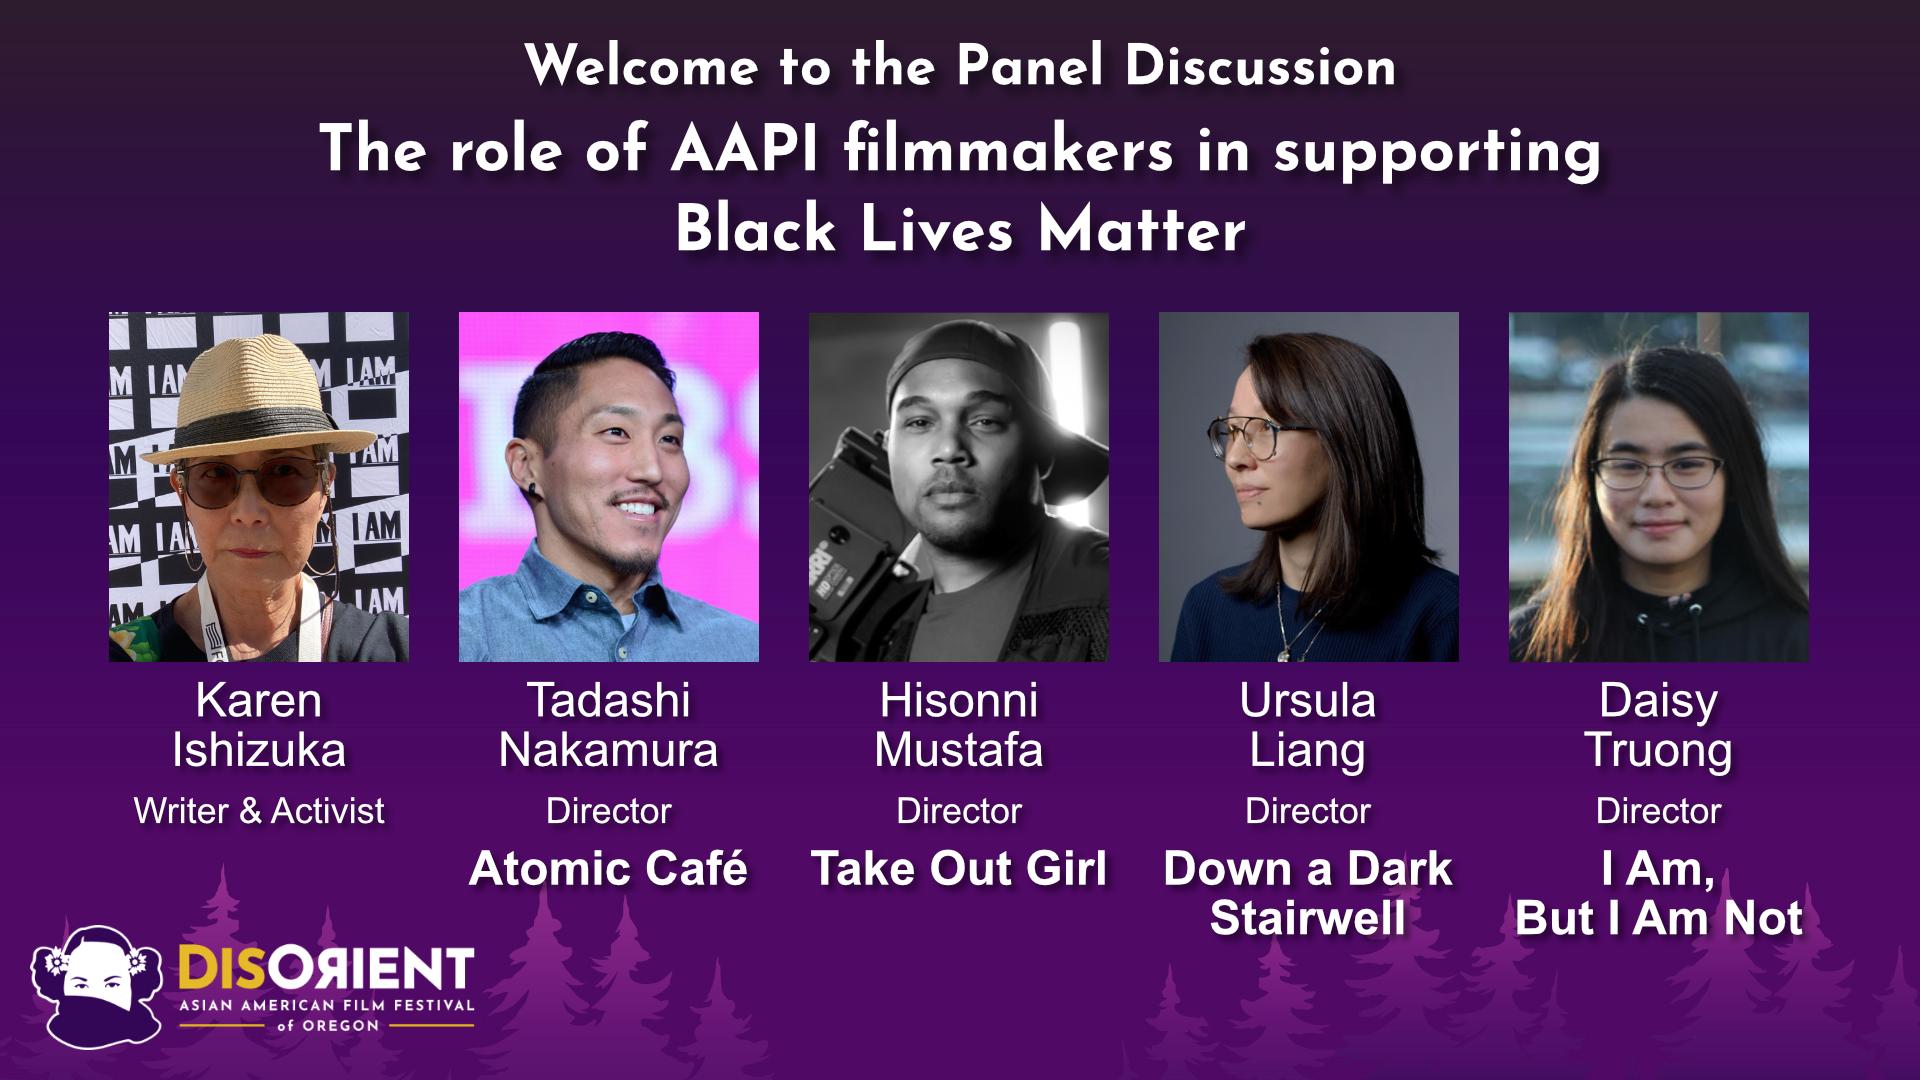 Panel Discussion: The role of AAPI filmmakers in supporting Black Lives Matter